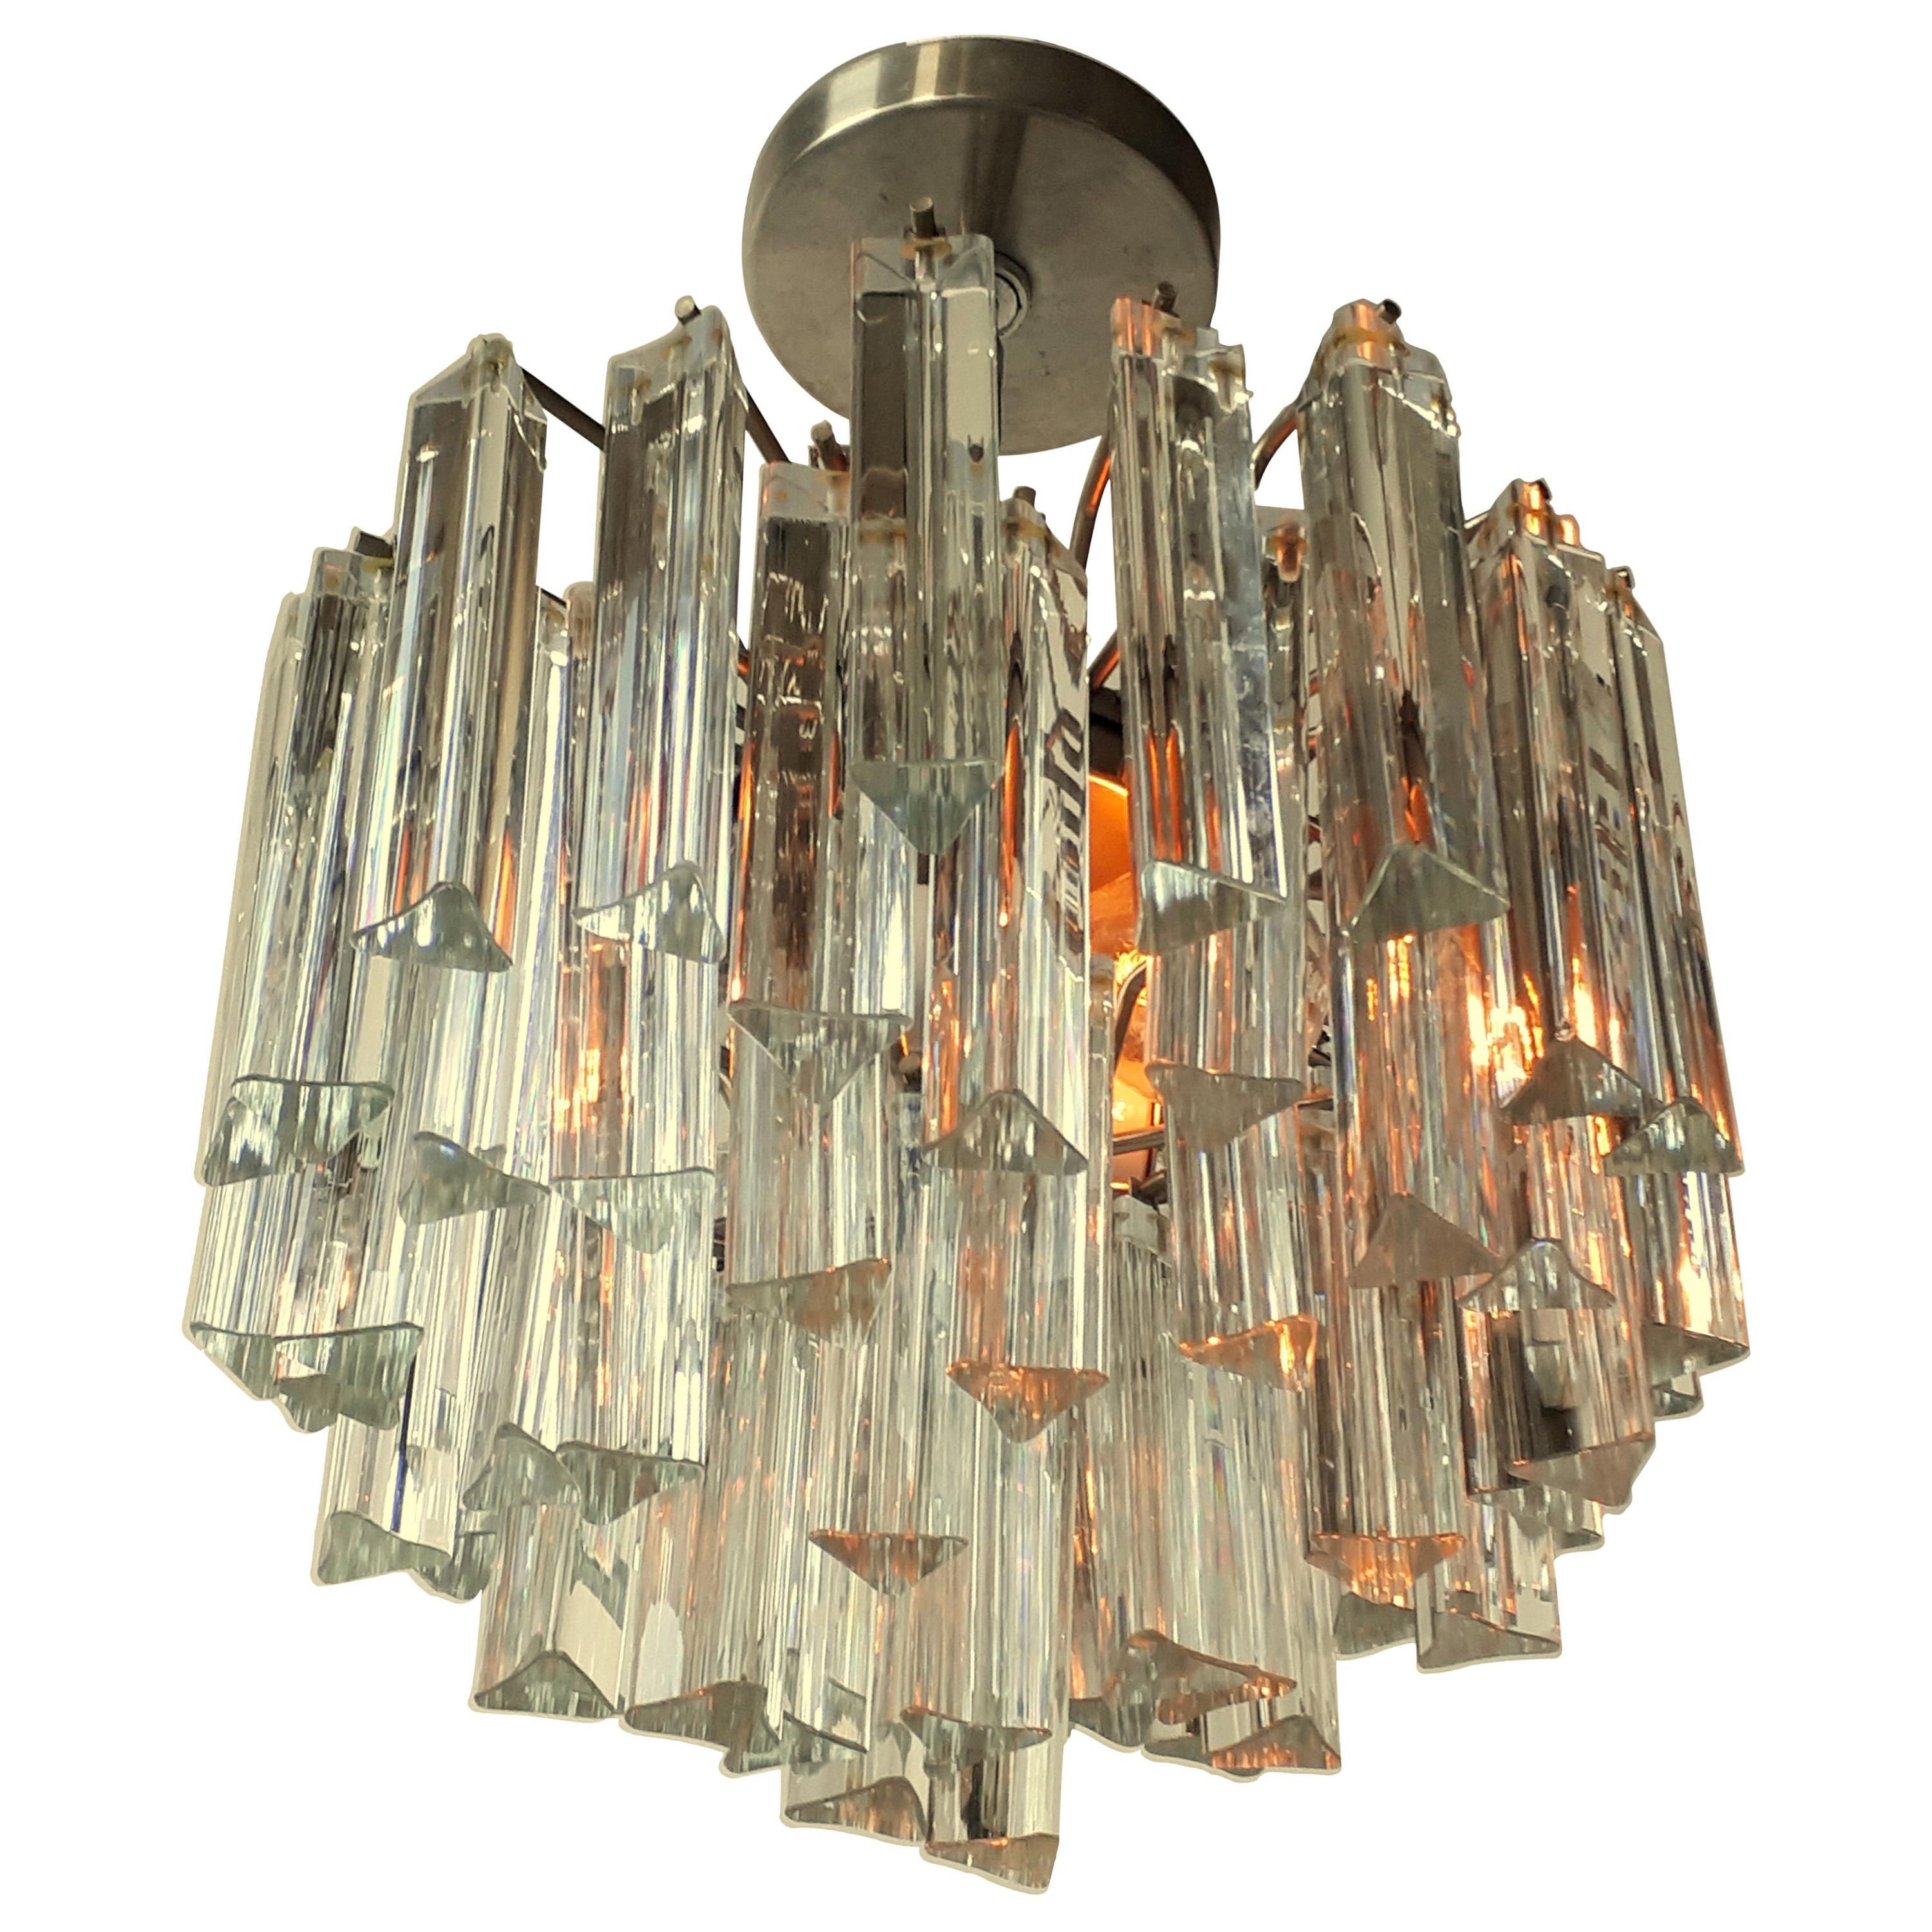 Camer, Venini Solid Glass Chandelier or Pendant, 1960s, Italy For Sale